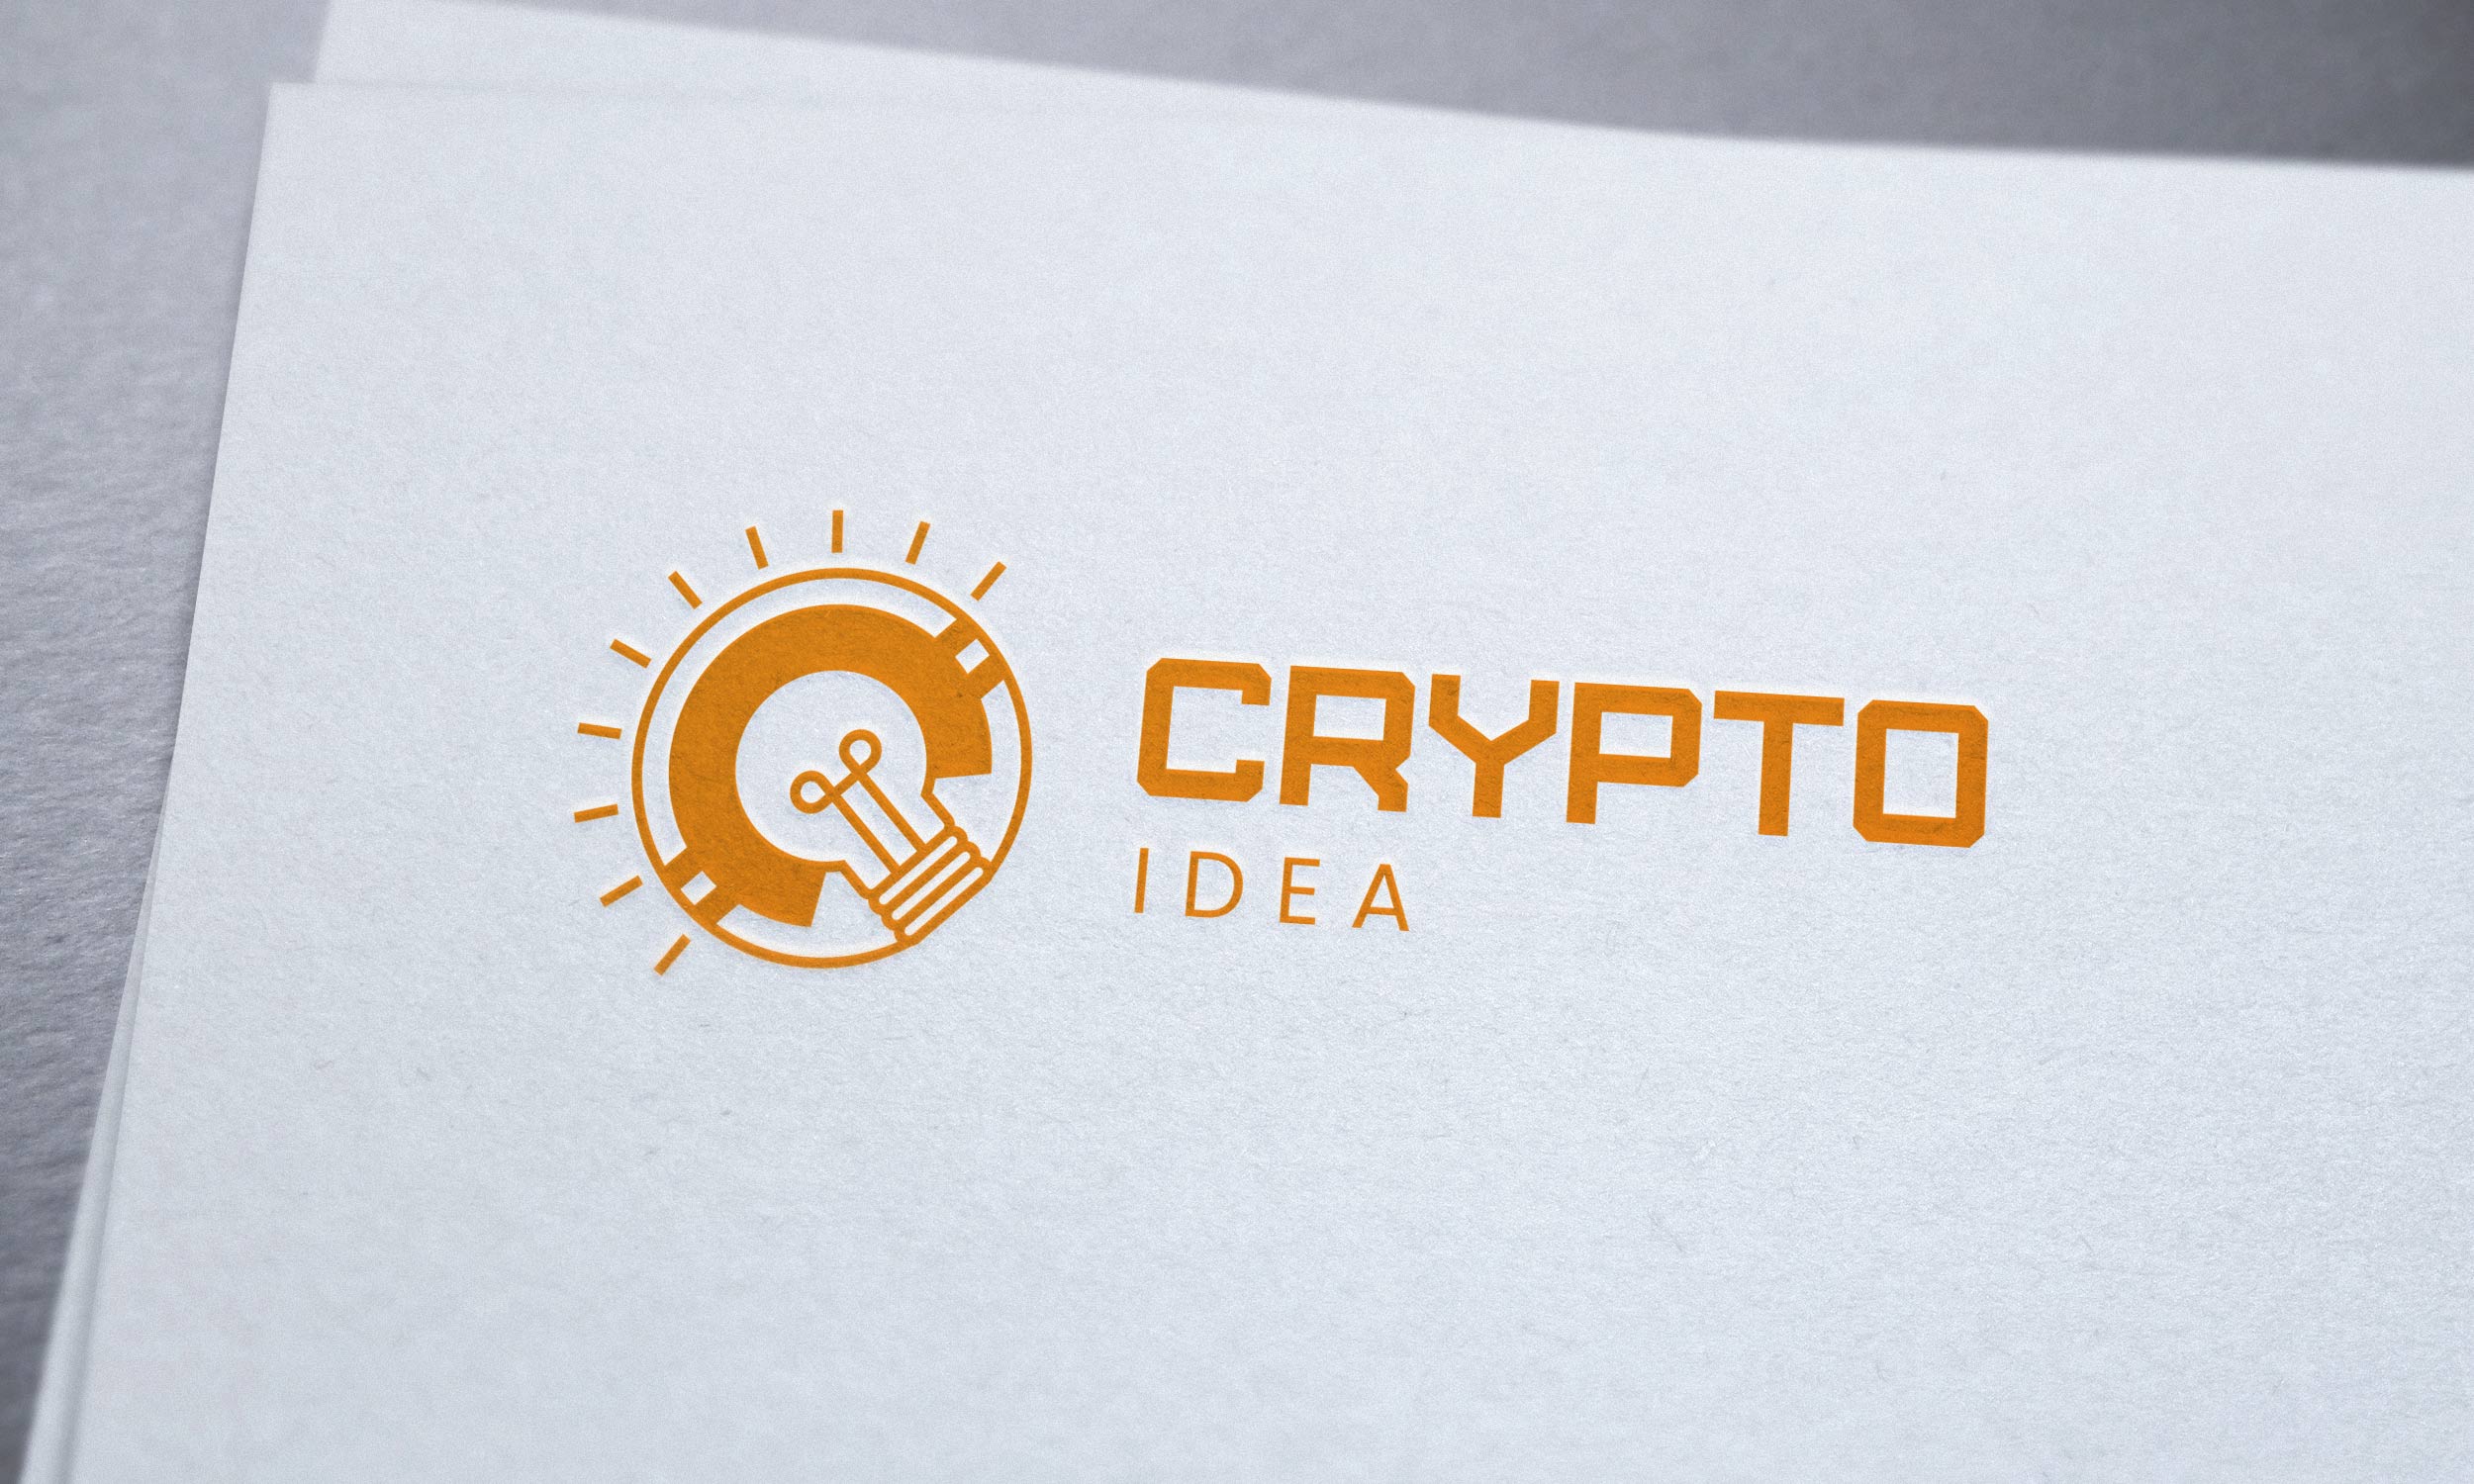 Gold crypto logo on a paper.